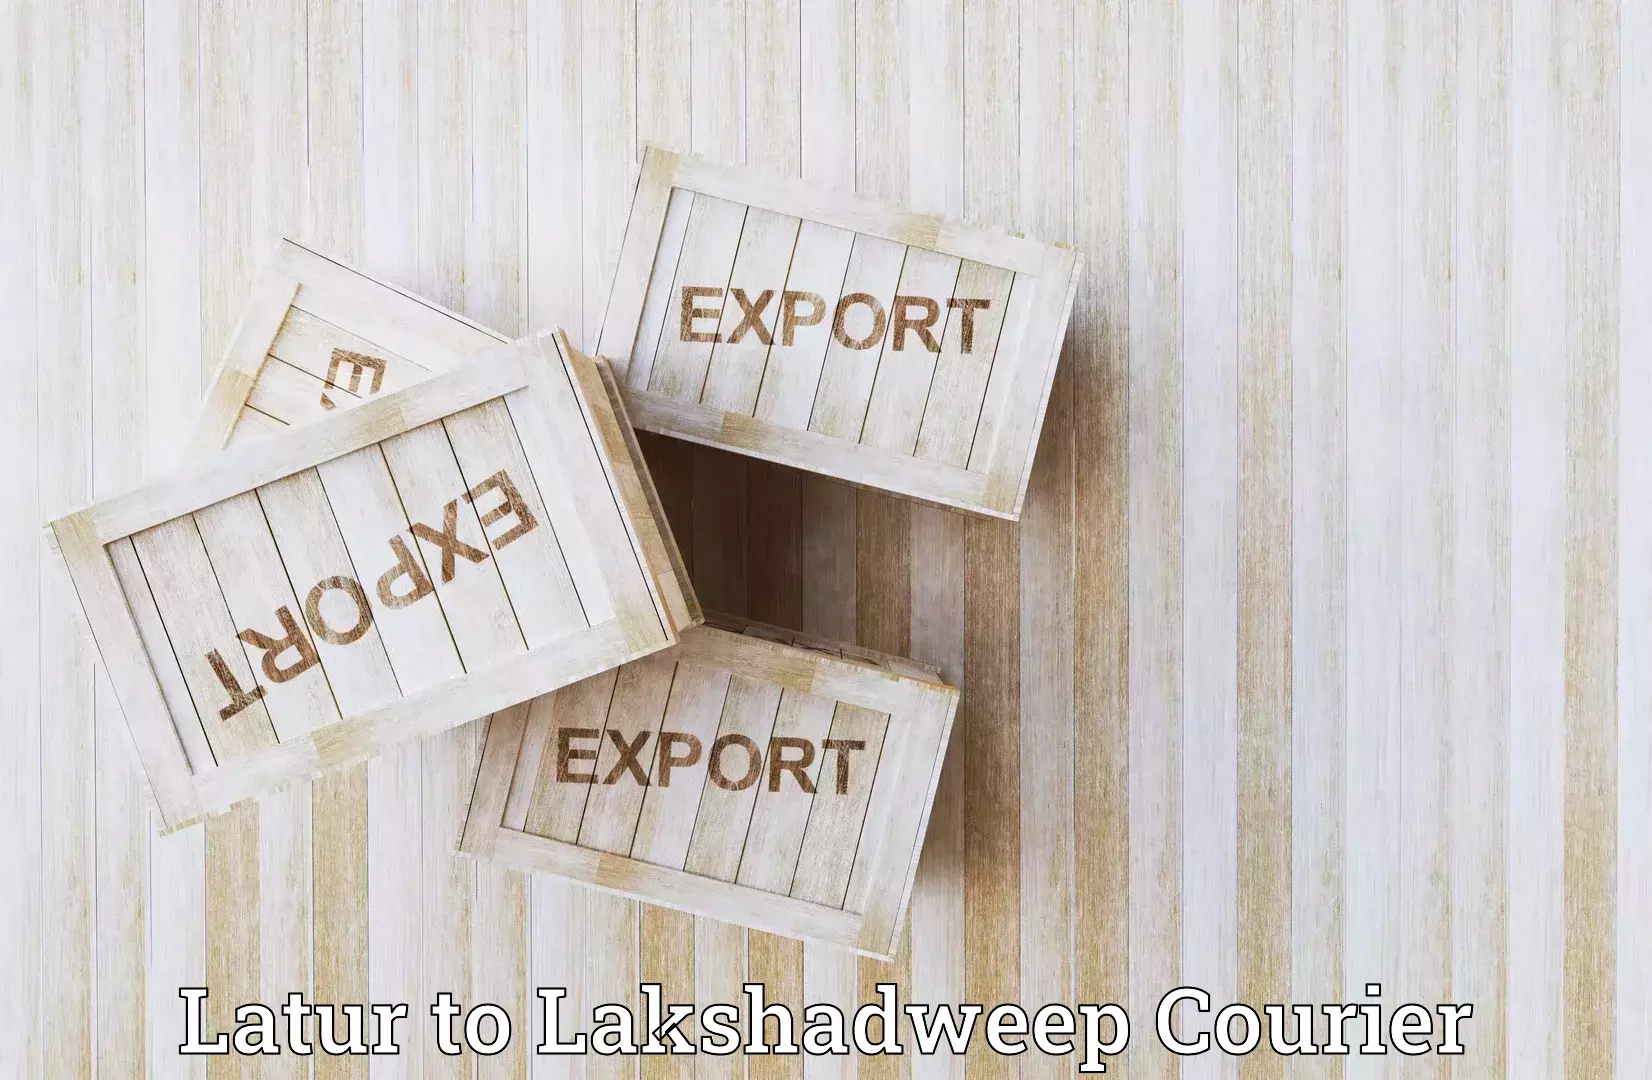 Global courier networks Latur to Lakshadweep